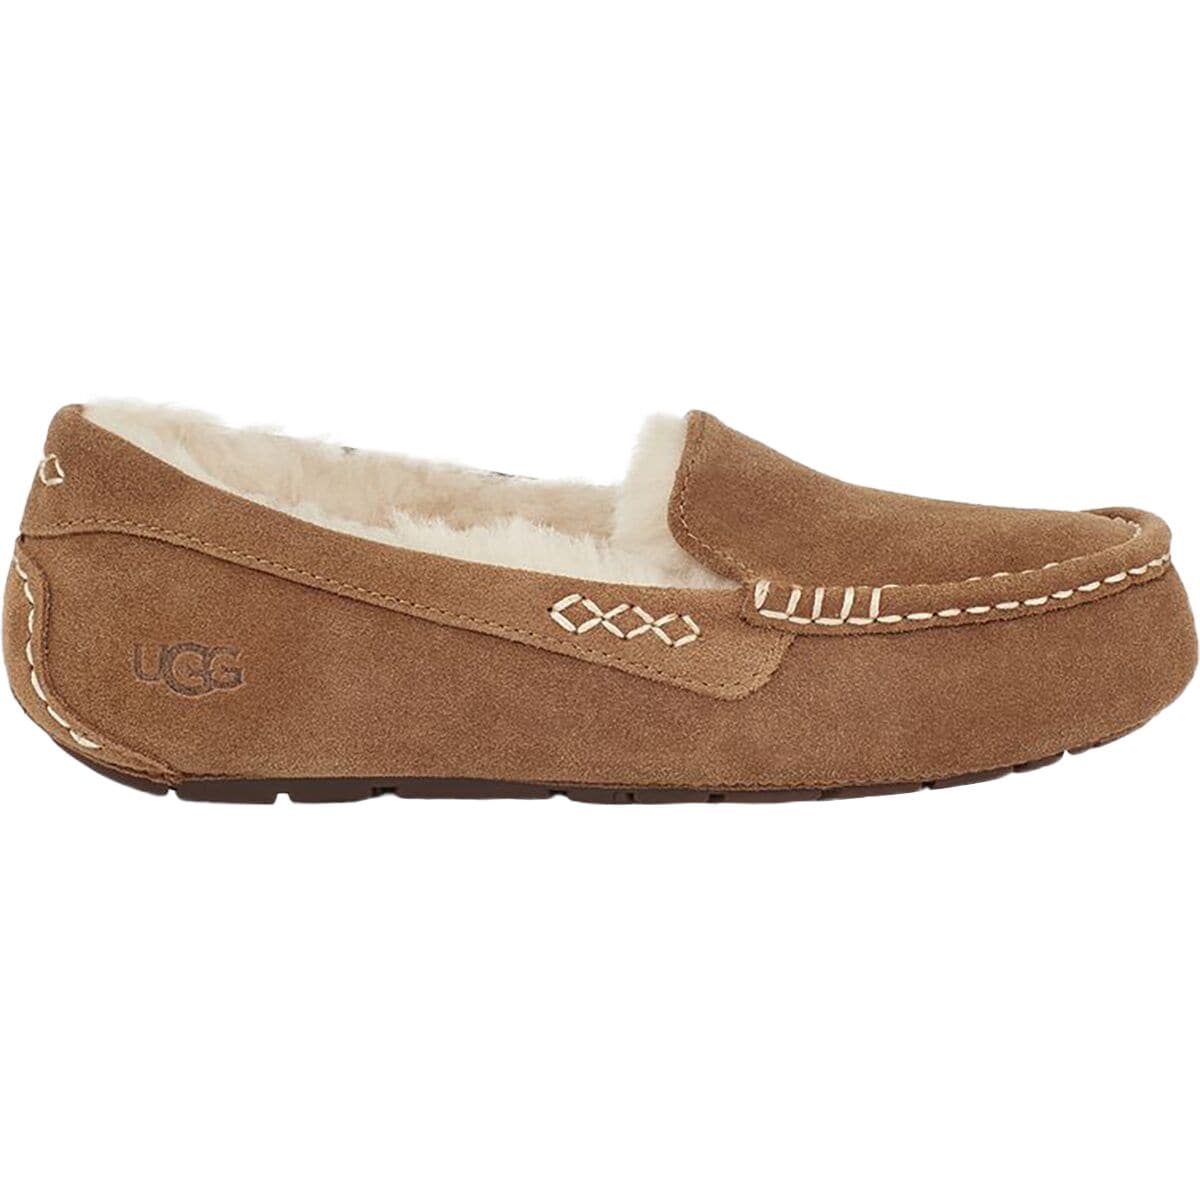 uggs women's ansley slippers